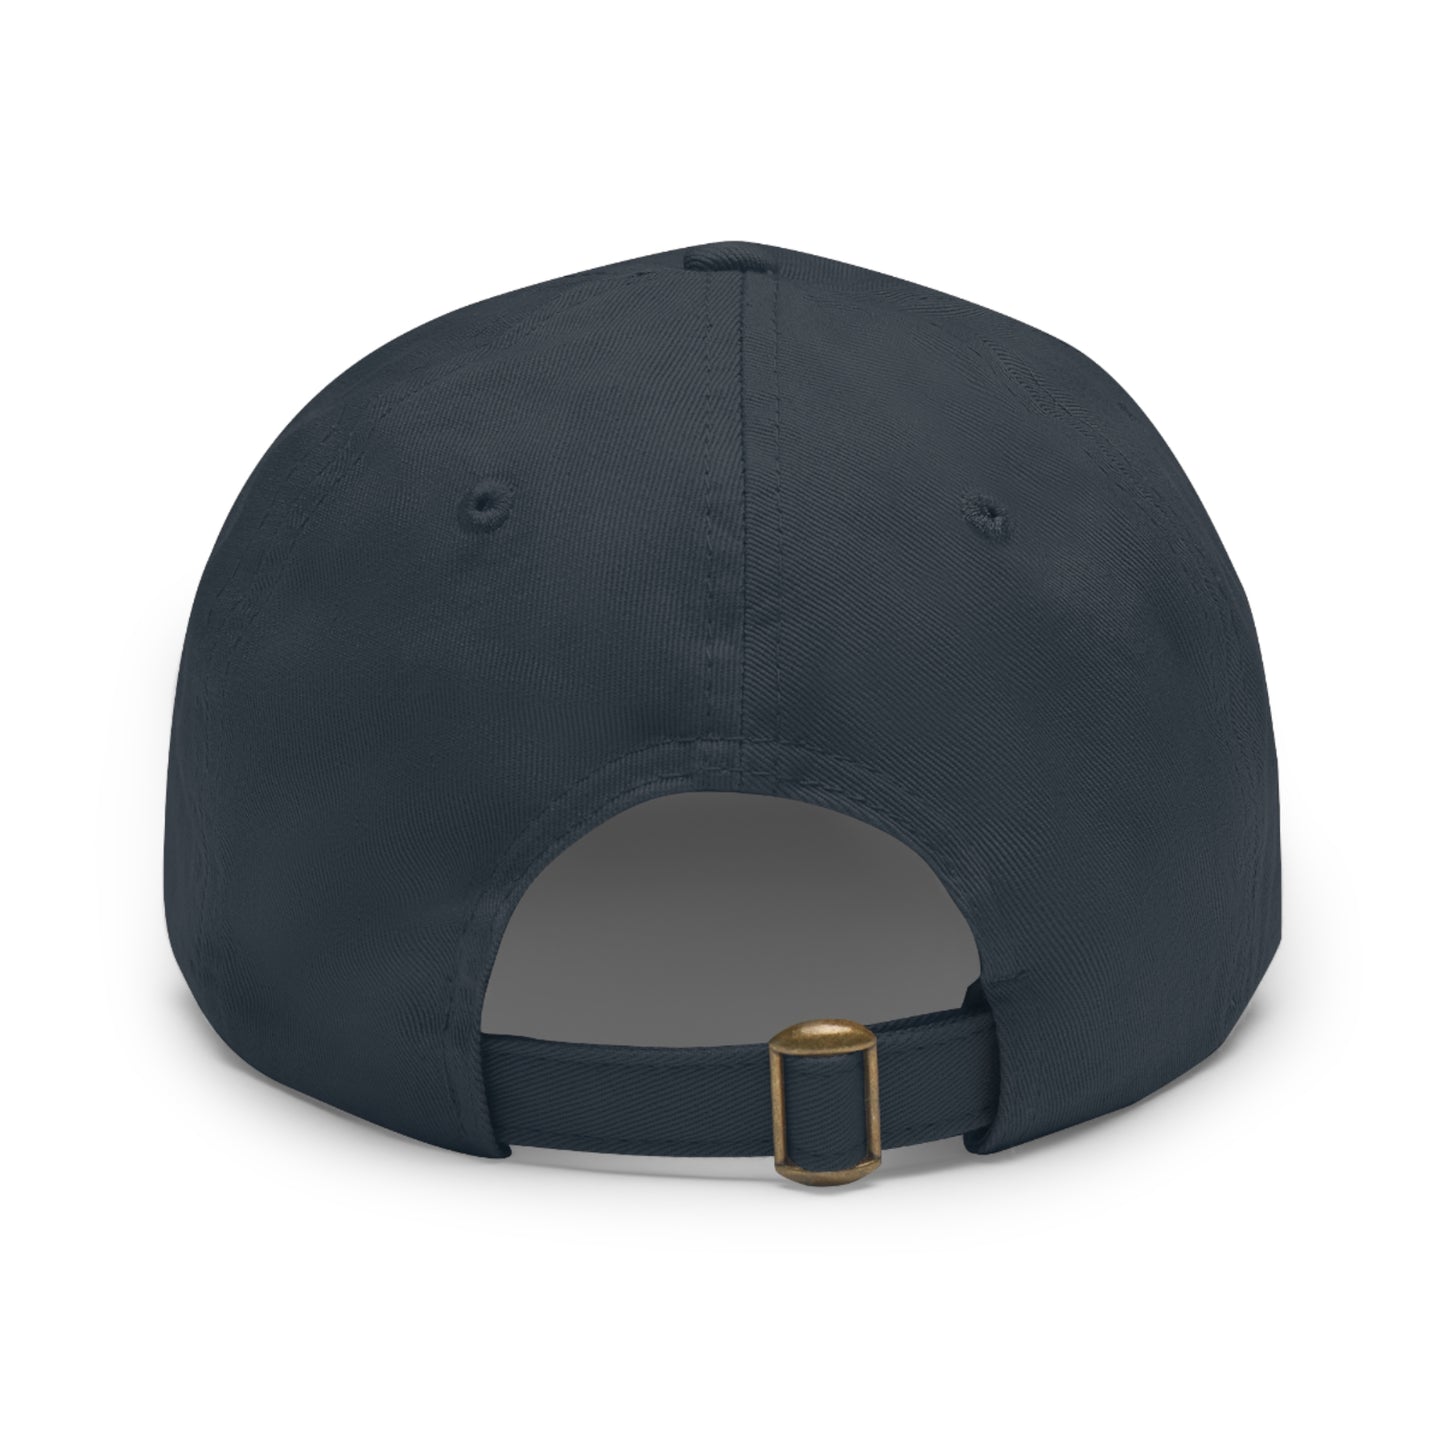 Dp work  Hat with Leather Patch (Round)